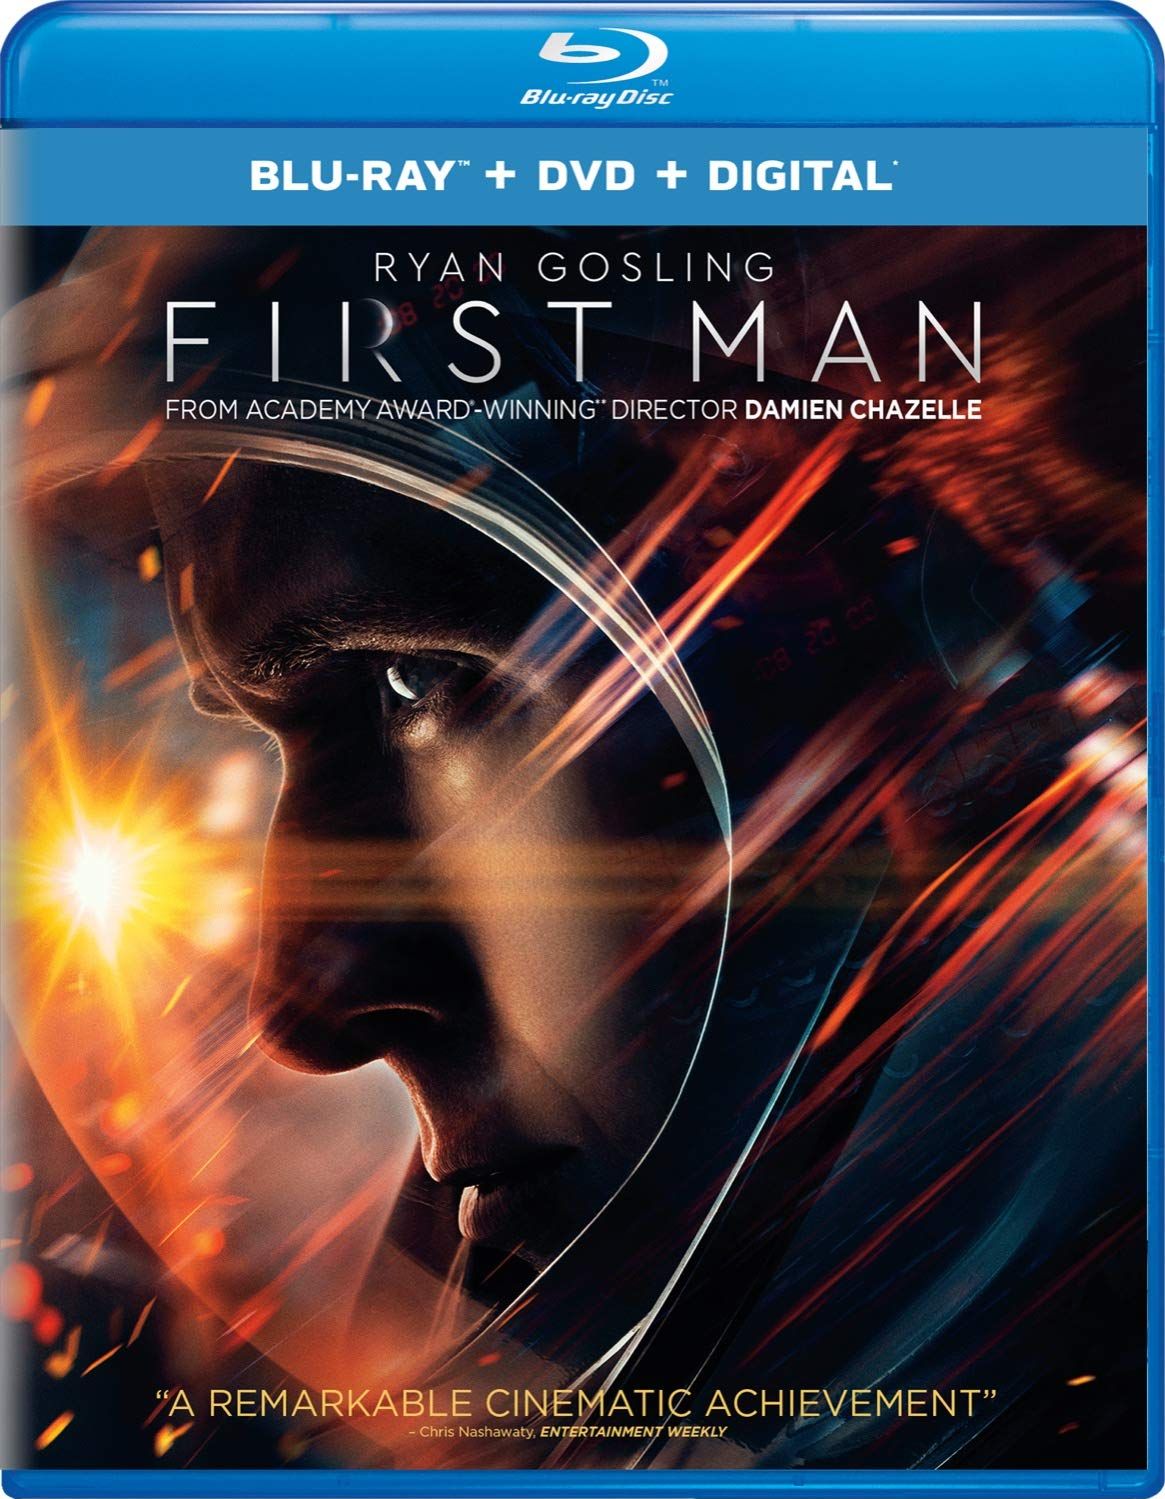 First Man DVD Release Date January 22, 20191165 x 1499